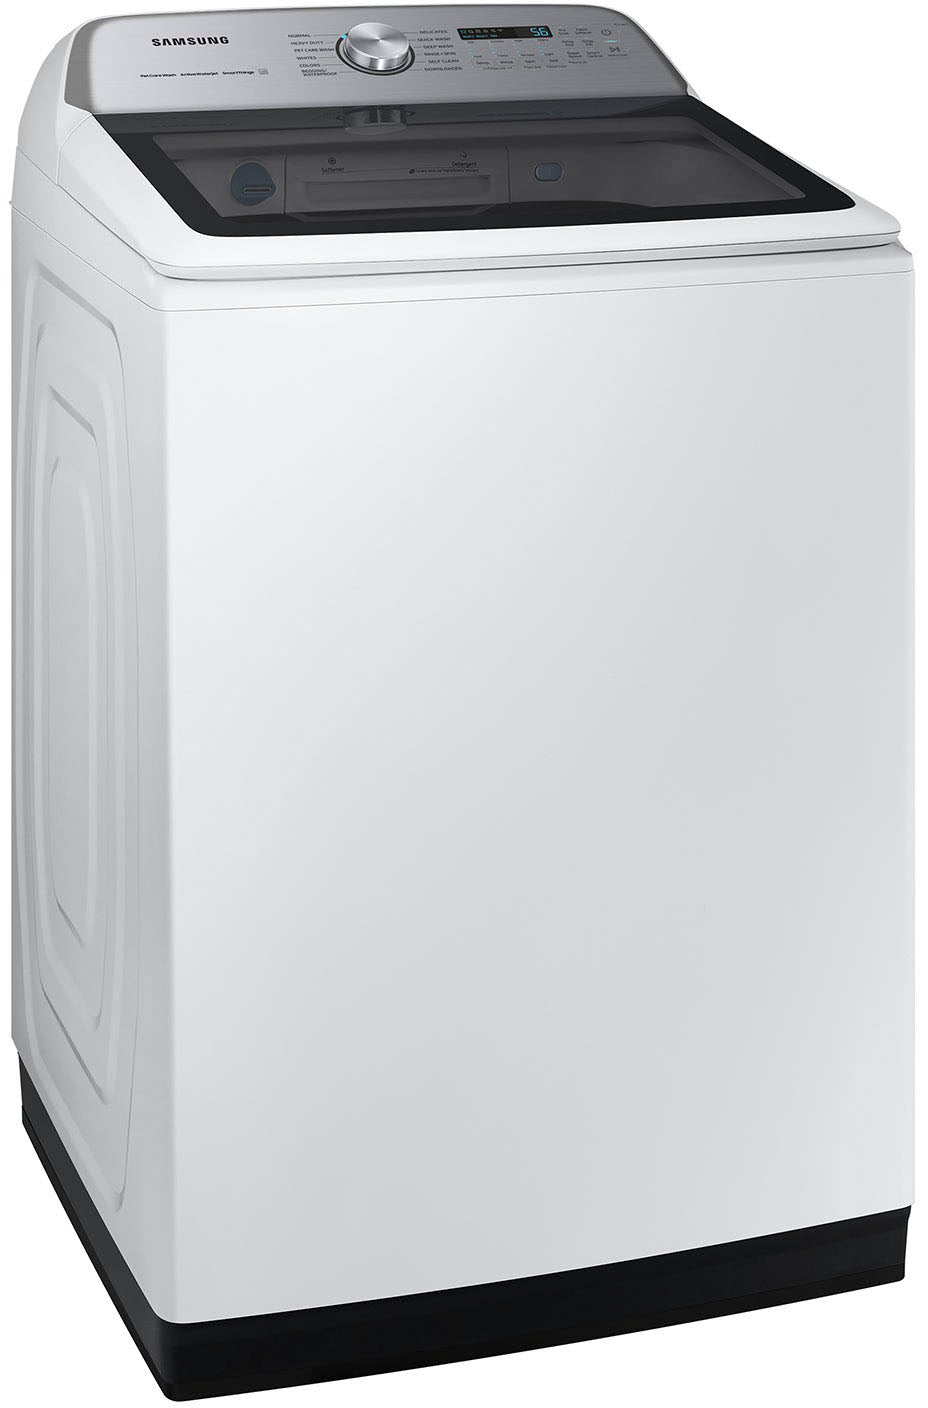 Samsung - 5.5 cu. ft. High-Efficiency Smart Top Load Washer with Super Speed Wash - White_11